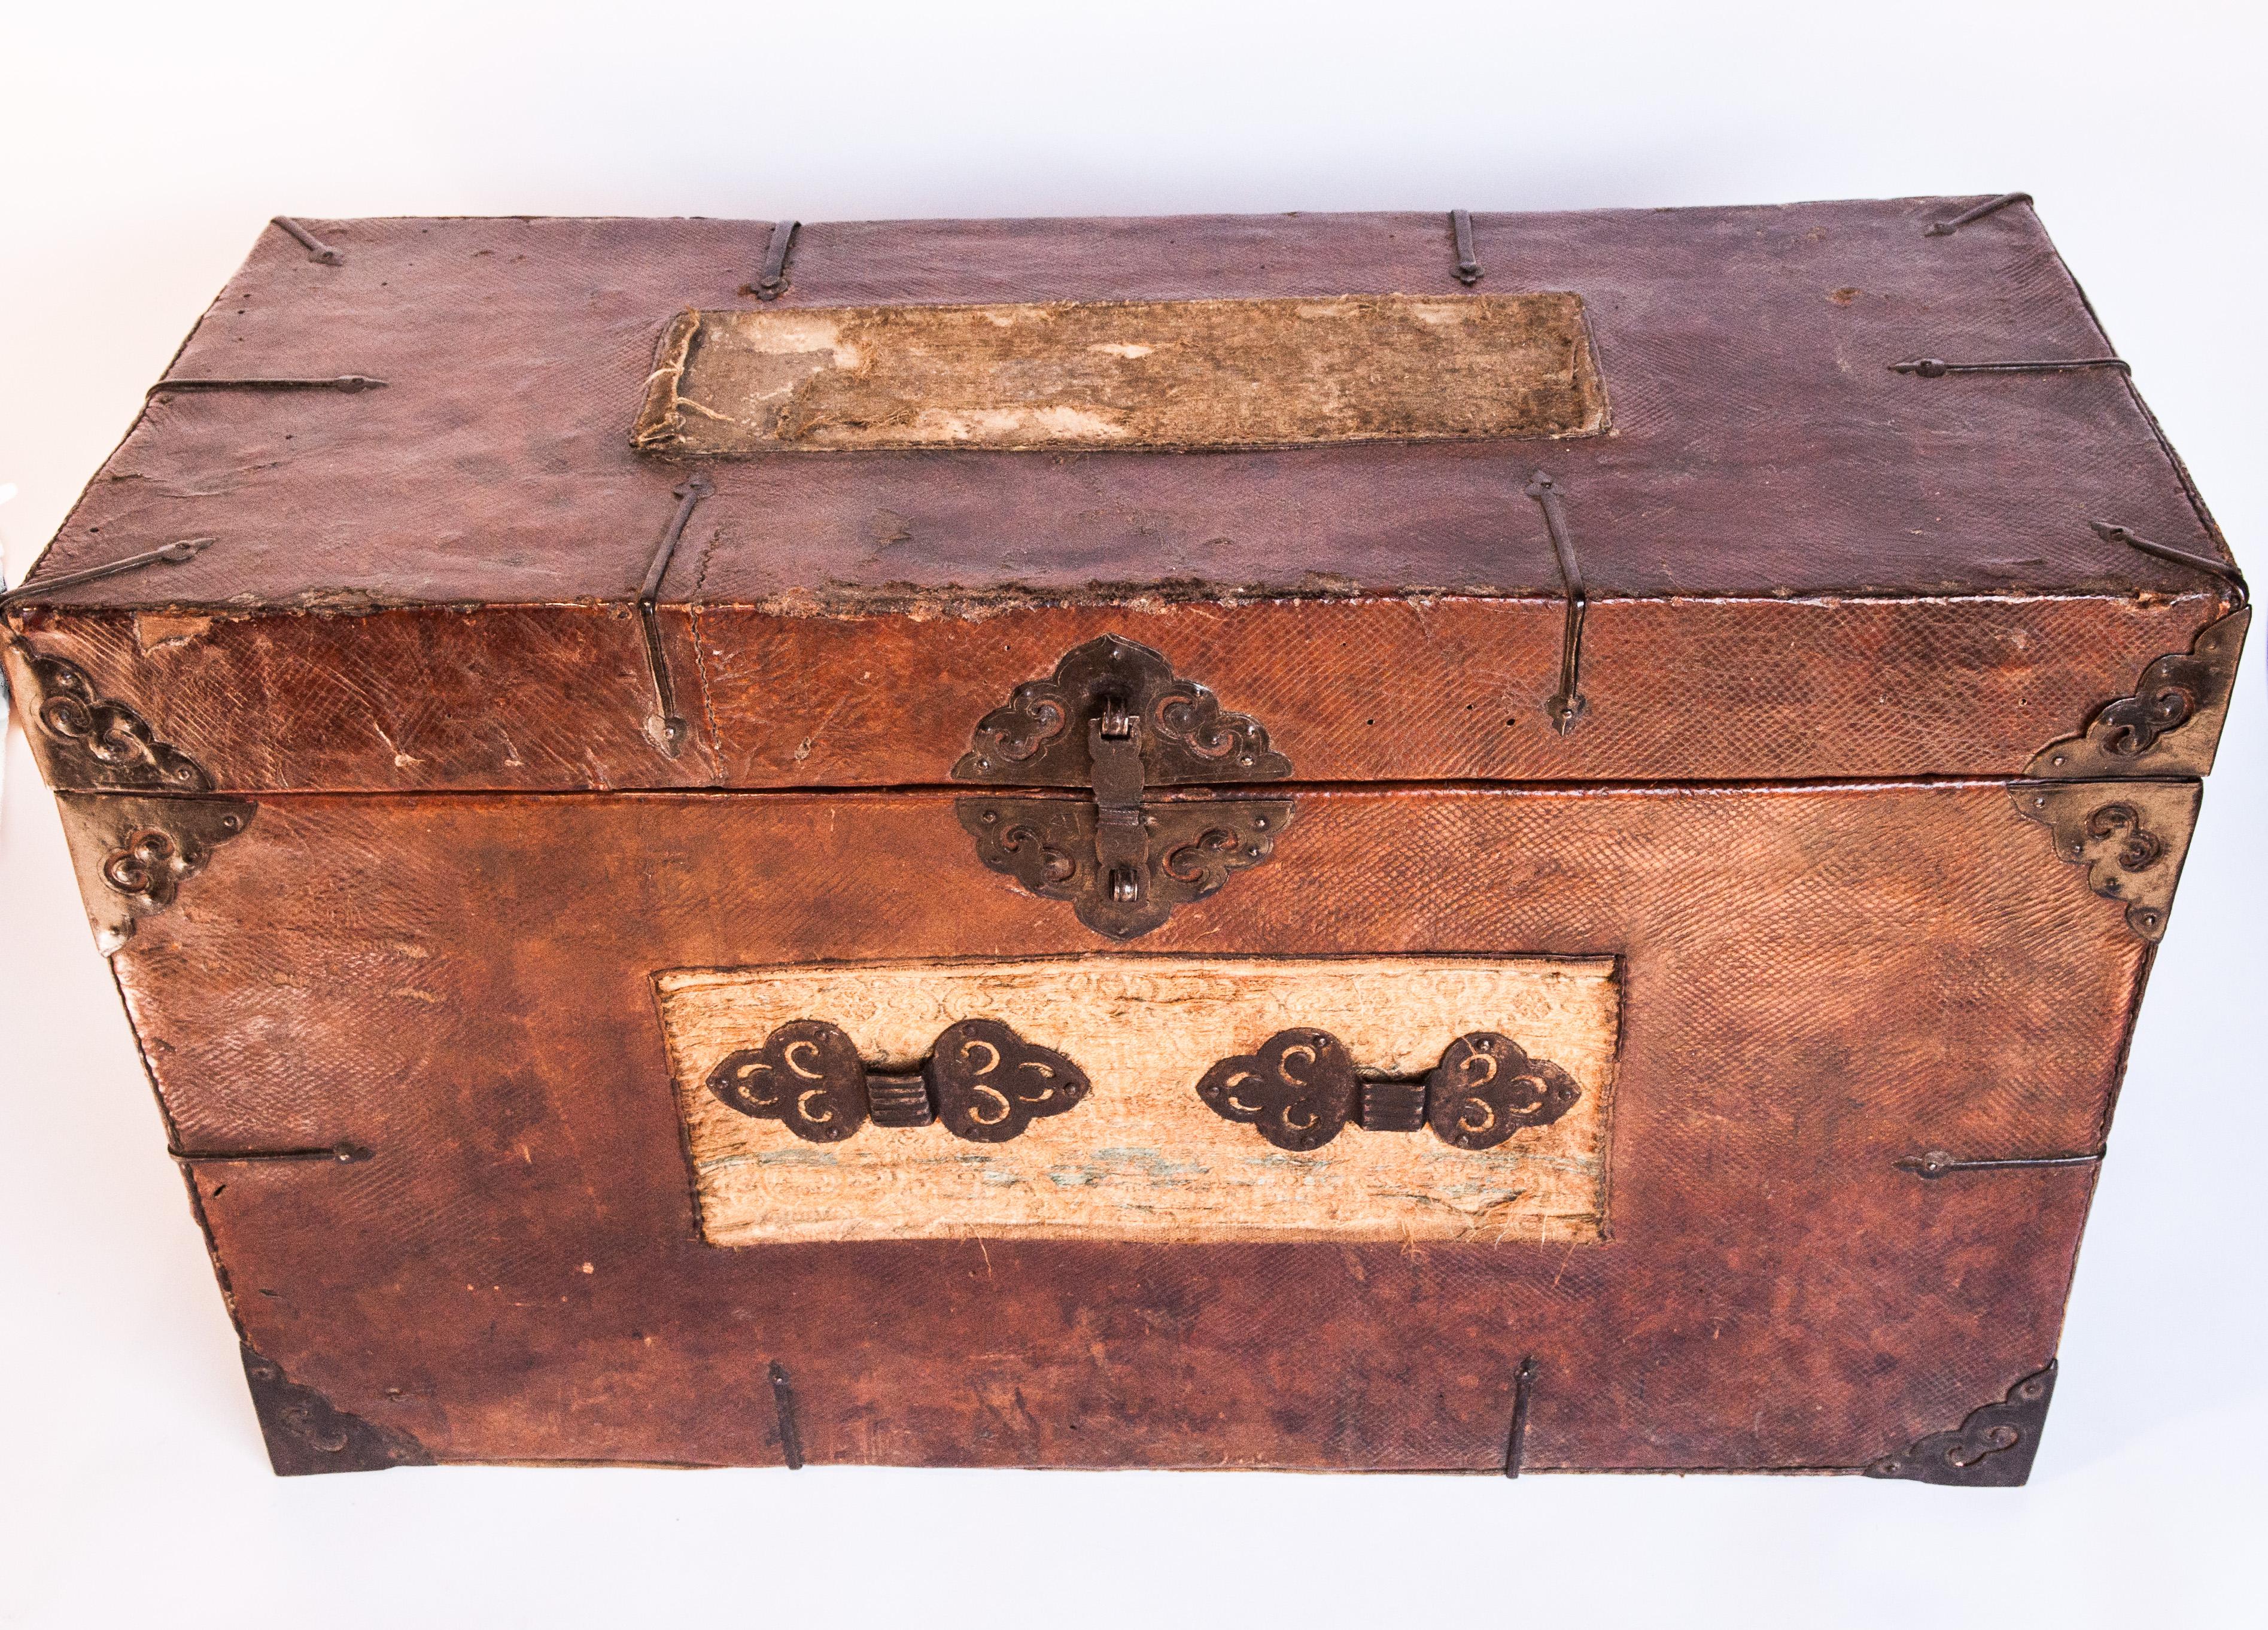 Early 20th century Tibetan leather chest with distressed silk tapestry panels.
This chest could have been used to store any manner of objects, from sacred to secular. It comprises original hand worked metal hardware, a rich patinated leather -